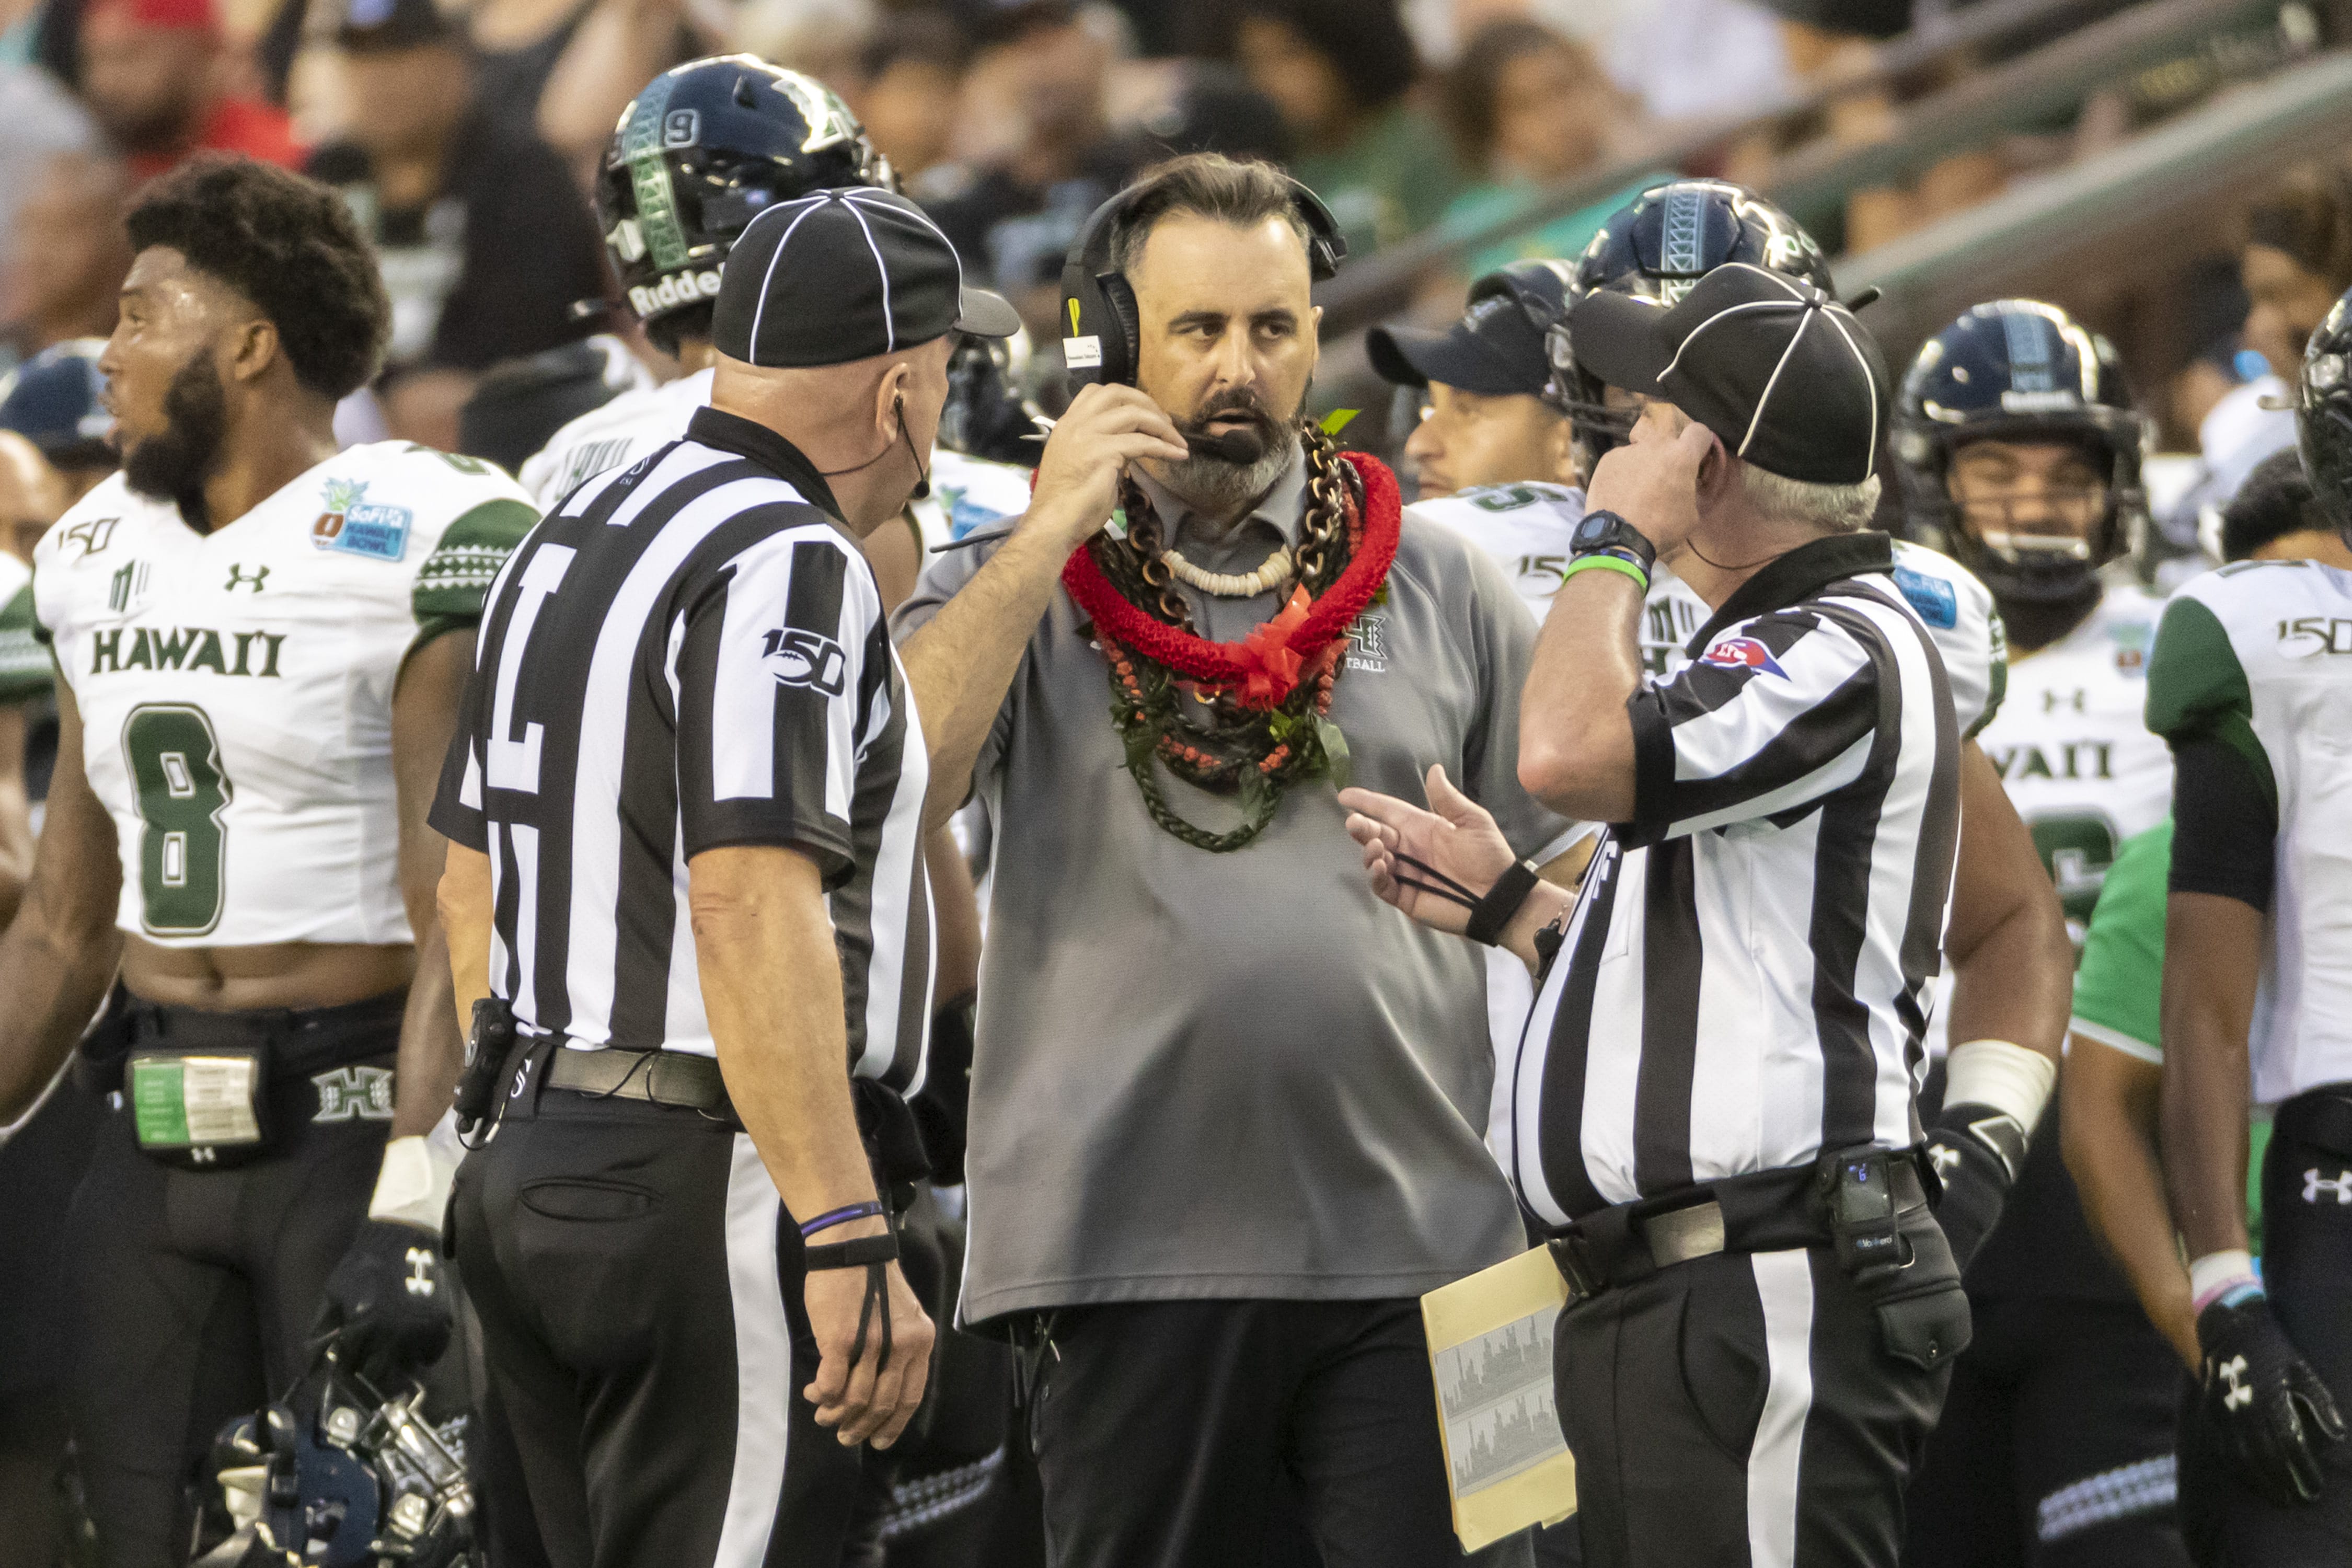 Hawaii head coach Nick Rolovich, center, speaks with the game officials in the second half of the Hawaii Bowl NCAA college football game, Tuesday, Dec. 24, 2019, in Honolulu.